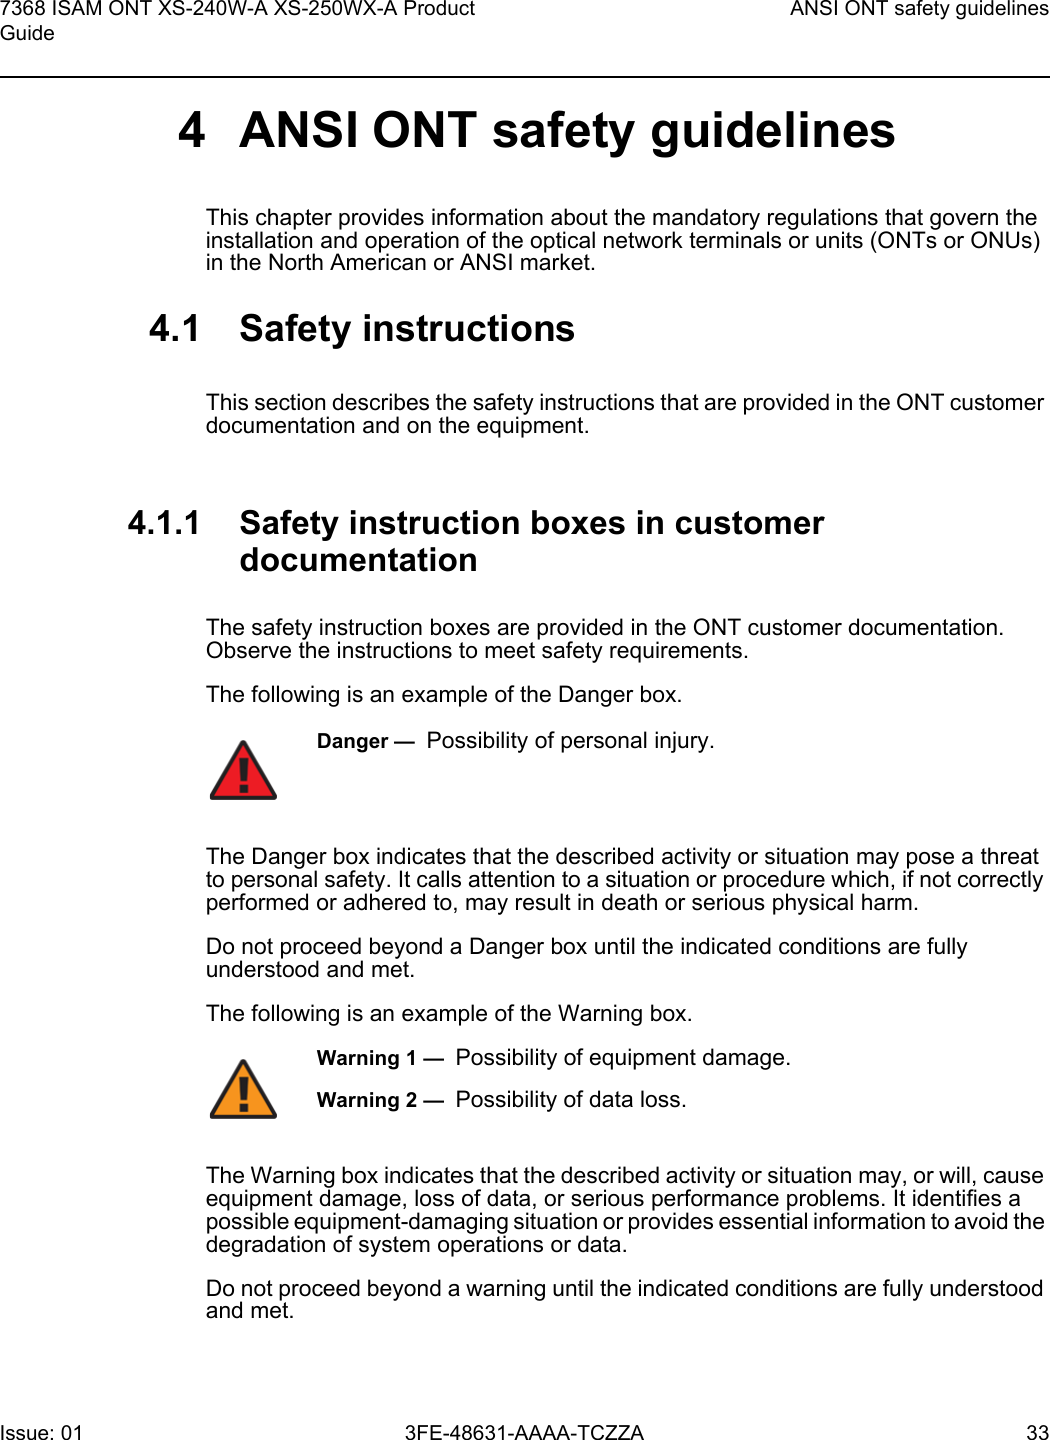 7368 ISAM ONT XS-240W-A XS-250WX-A Product GuideANSI ONT safety guidelinesIssue: 01 3FE-48631-AAAA-TCZZA 33 4 ANSI ONT safety guidelinesThis chapter provides information about the mandatory regulations that govern the installation and operation of the optical network terminals or units (ONTs or ONUs) in the North American or ANSI market.4.1 Safety instructionsThis section describes the safety instructions that are provided in the ONT customer documentation and on the equipment.4.1.1 Safety instruction boxes in customer documentationThe safety instruction boxes are provided in the ONT customer documentation. Observe the instructions to meet safety requirements.The following is an example of the Danger box.The Danger box indicates that the described activity or situation may pose a threat to personal safety. It calls attention to a situation or procedure which, if not correctly performed or adhered to, may result in death or serious physical harm. Do not proceed beyond a Danger box until the indicated conditions are fully understood and met.The following is an example of the Warning box.The Warning box indicates that the described activity or situation may, or will, cause equipment damage, loss of data, or serious performance problems. It identifies a possible equipment-damaging situation or provides essential information to avoid the degradation of system operations or data.Do not proceed beyond a warning until the indicated conditions are fully understood and met.Danger —  Possibility of personal injury. Warning 1 —  Possibility of equipment damage.Warning 2 —  Possibility of data loss.